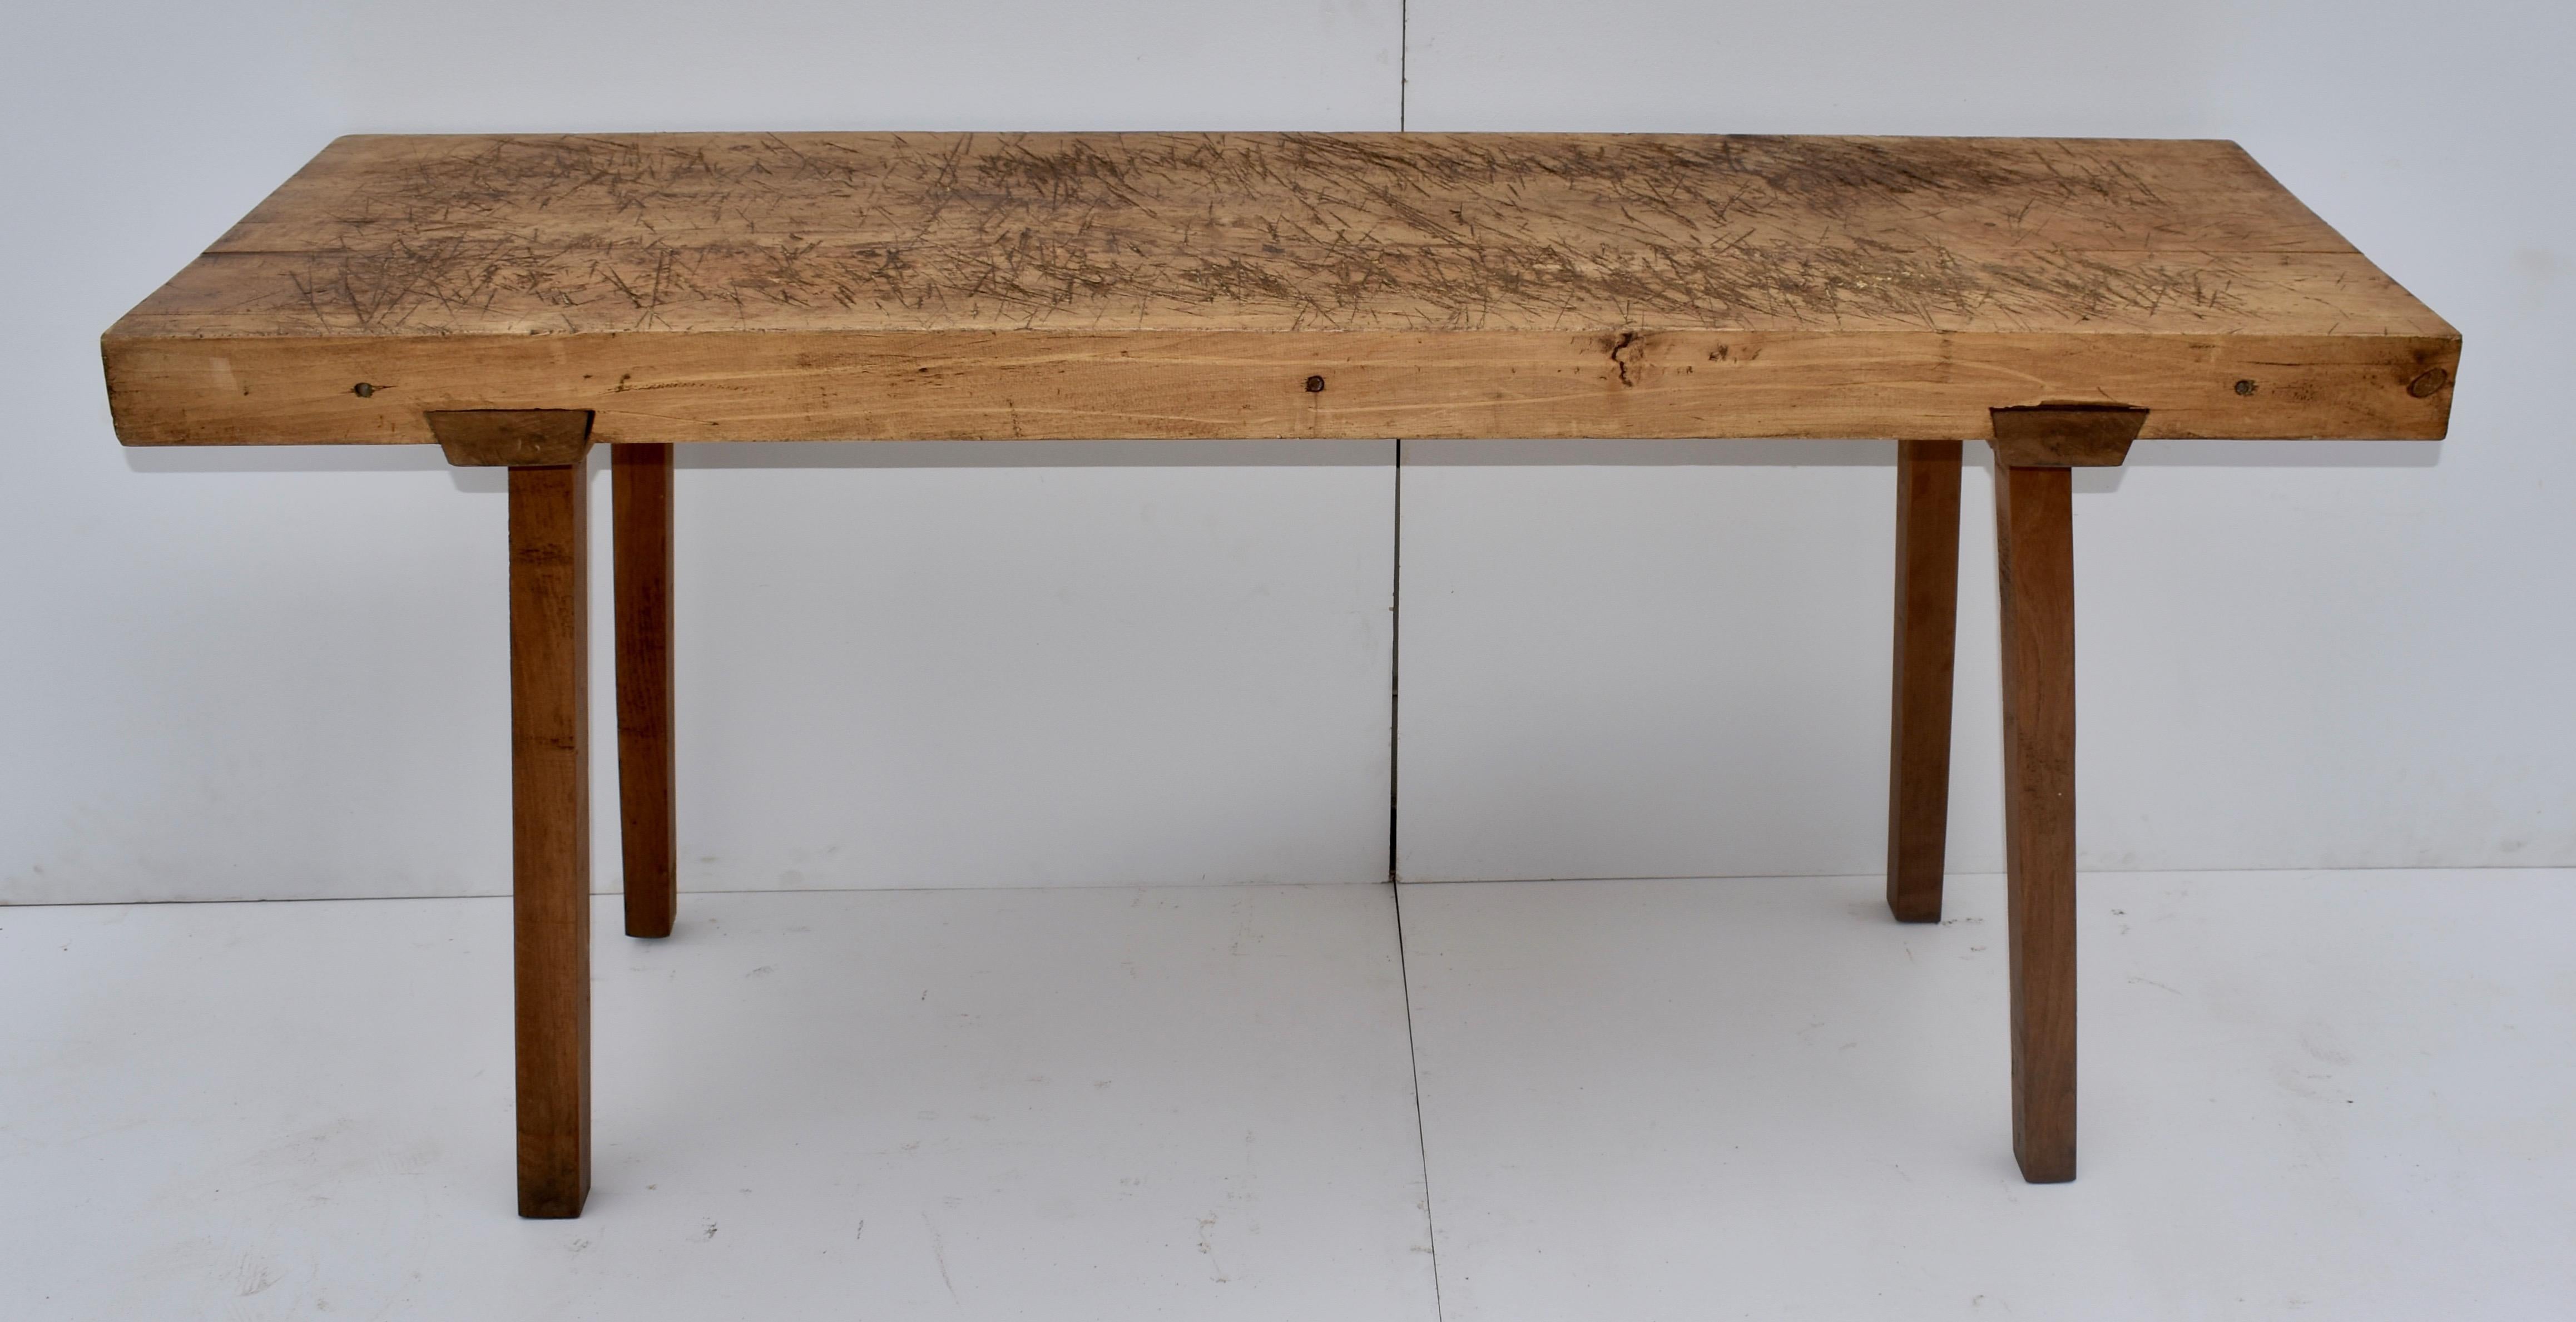 Two massive slabs of oak over 3.5” thick, tightly joined together with three iron bolts passing through the center of the boards, comprise the top of this magnificent pig bench. The dark oak legs, 2” thick, are mortised into sturdy cleats which then